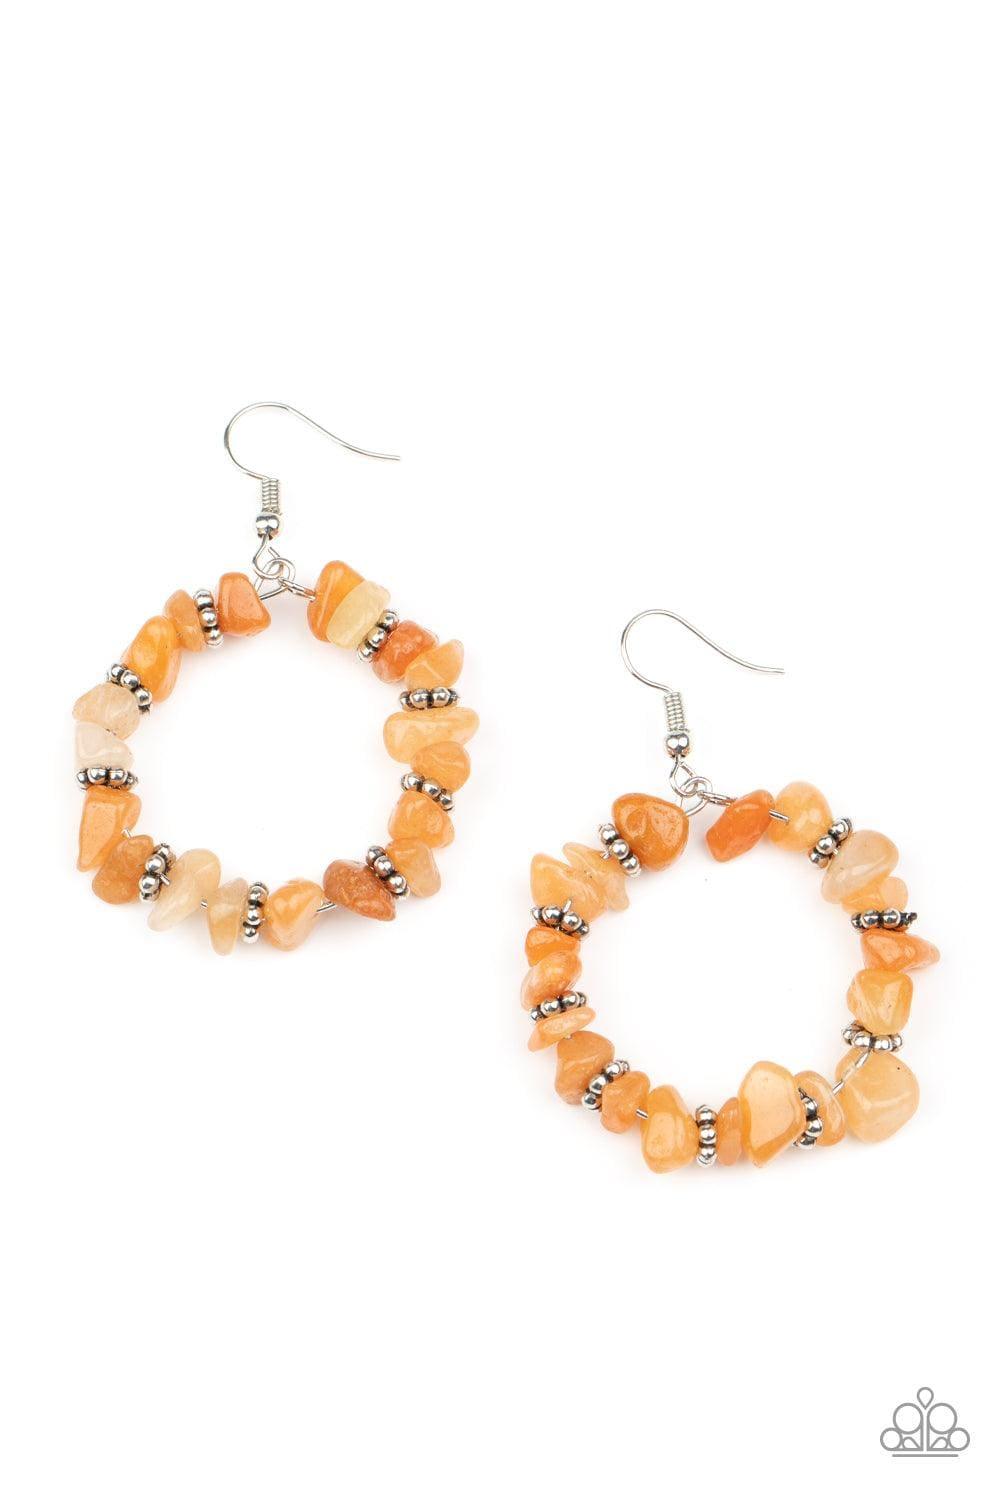 Paparazzi Accessories - Going For Grounded - Orange Earrings - Bling by JessieK